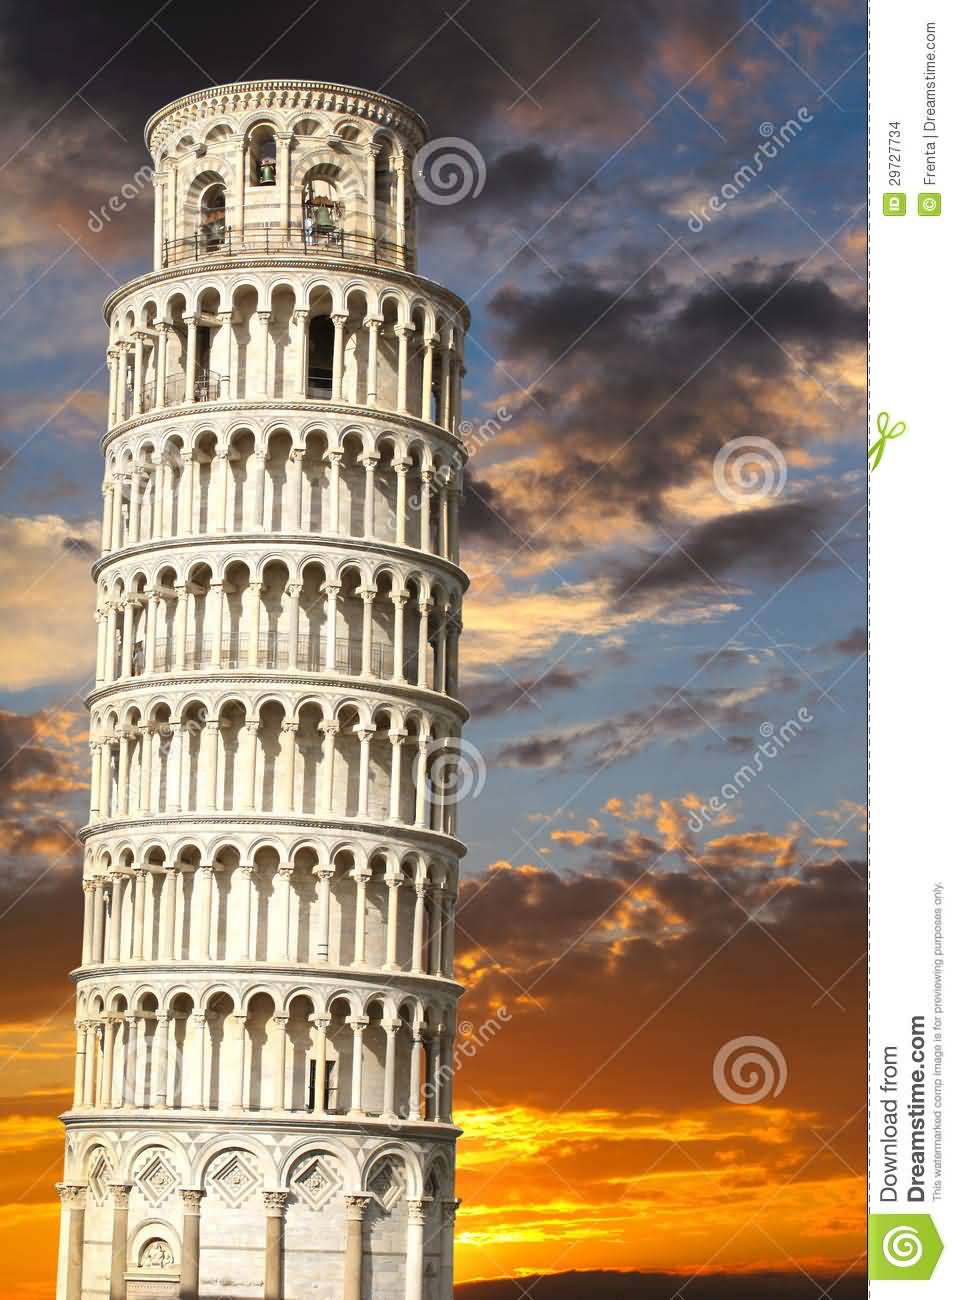 Adorable Sunset View Of Leaning Tower Of Pisa